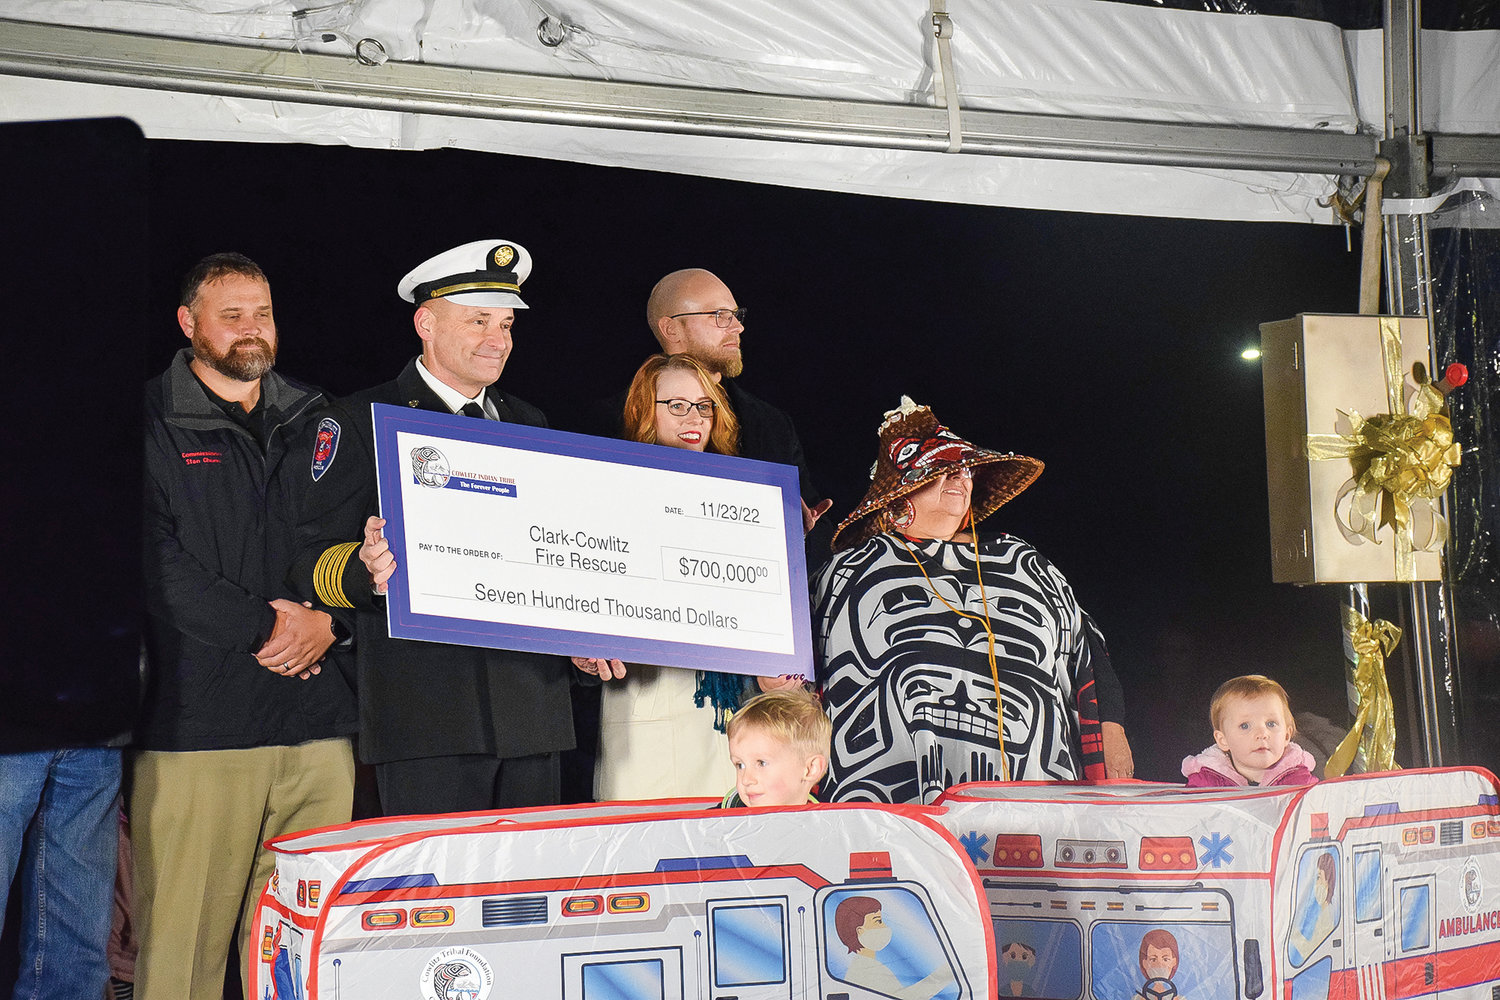 Clark-Cowlitz Fire Rescue Chief John Nohr receives a check for $700,000 from the Cowlitz Tribal Foundation during a tree lighting event at ilani on Nov. 23.